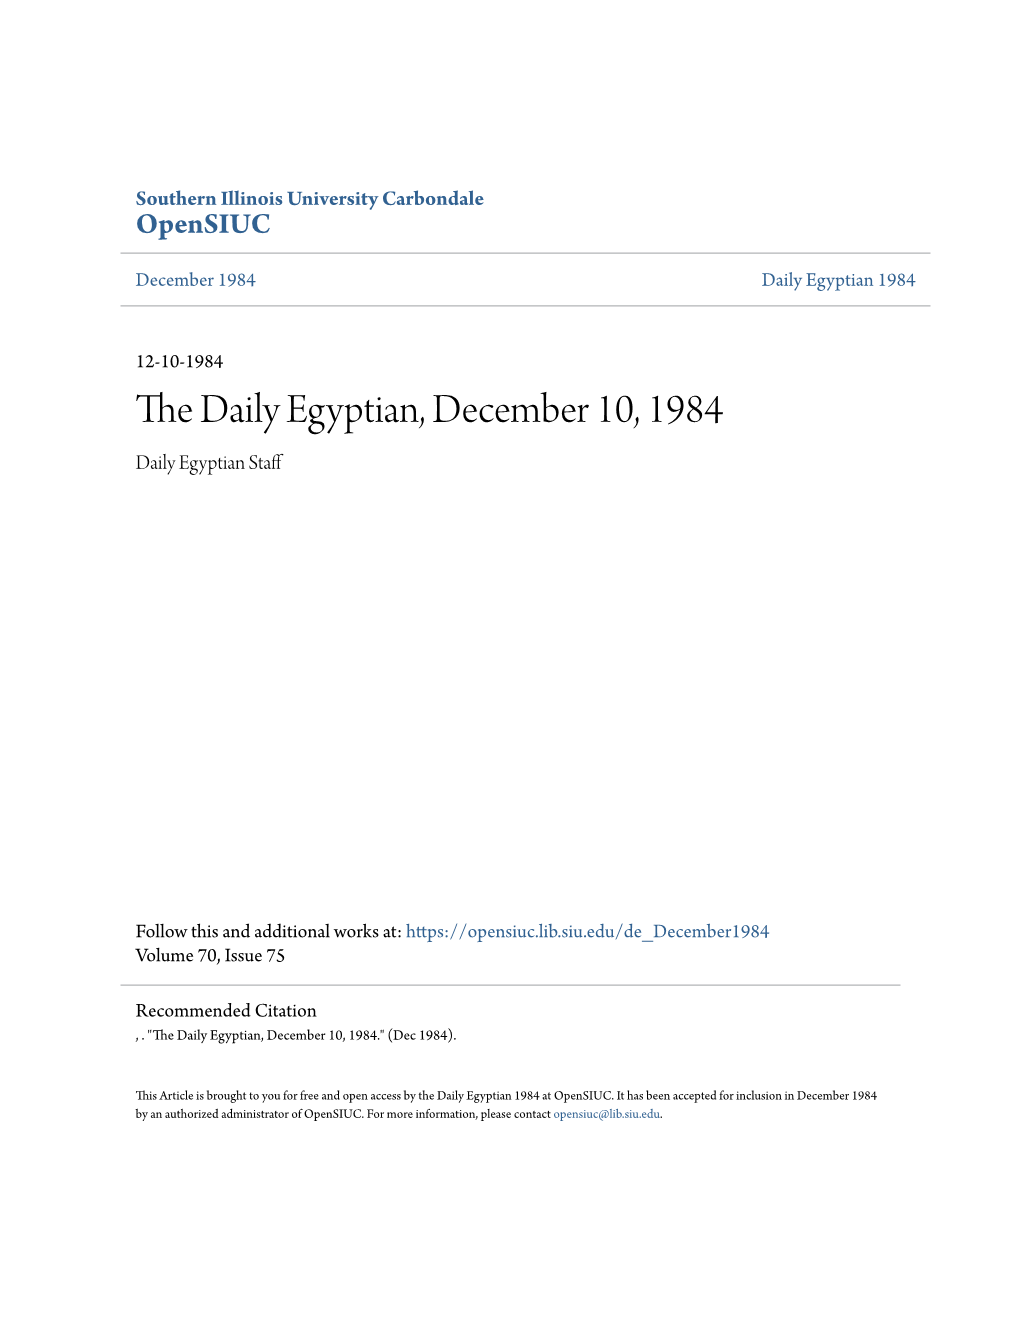 The Daily Egyptian, December 10, 1984